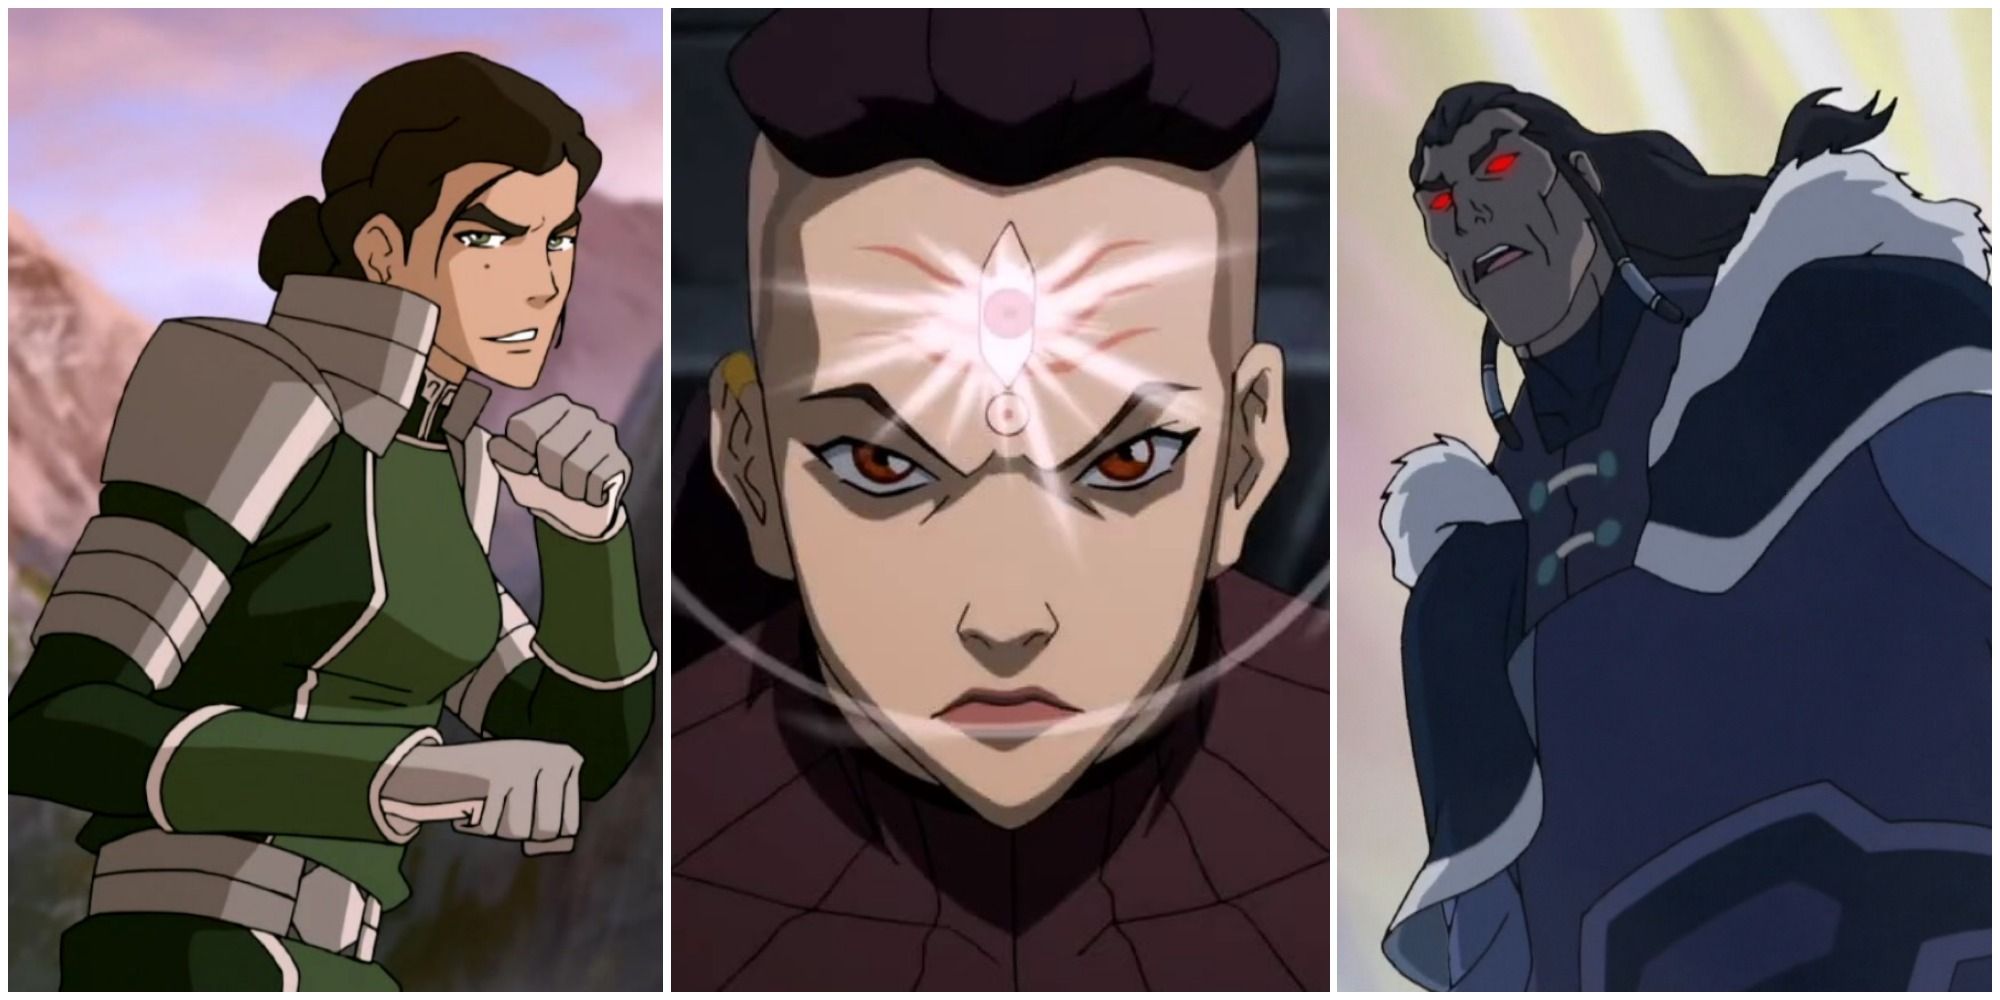 Legend Of Korra Every Main Villain From Worst To Best Ranked